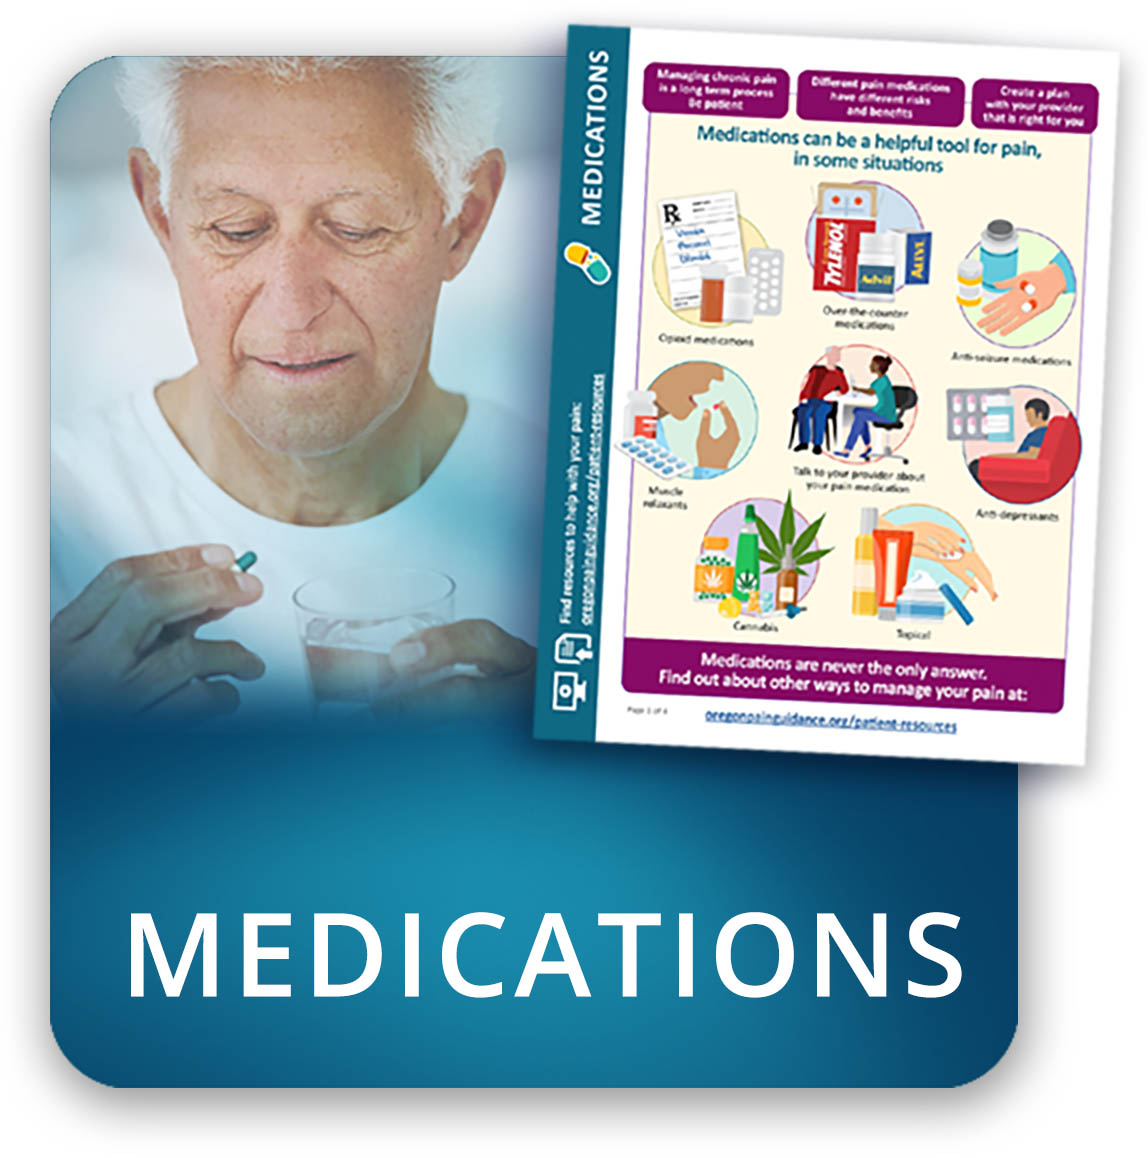 Understand pain and medications